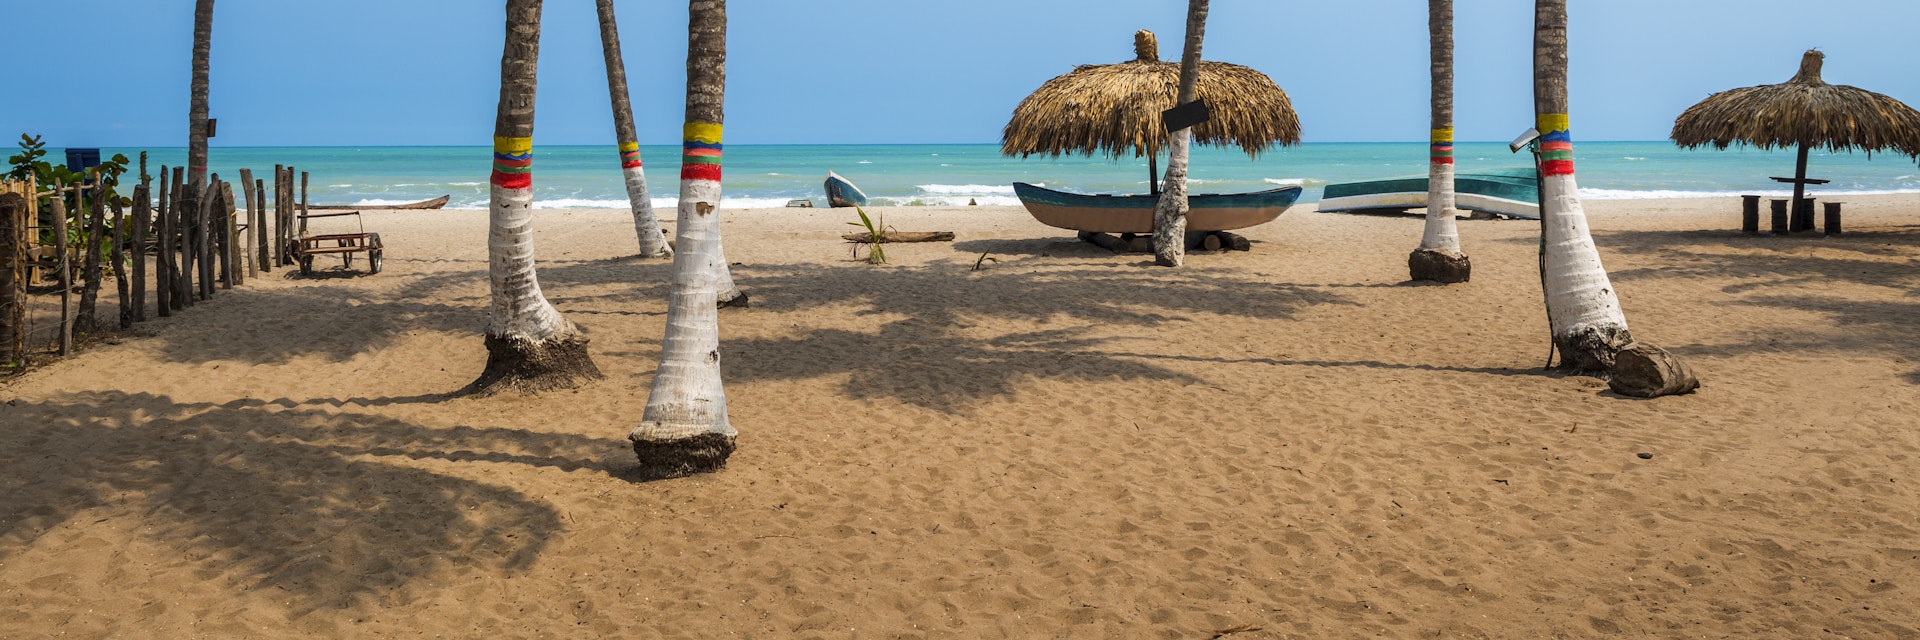 The beautiful beach of Palomino in the Caribbean Coast of Colombia, South America; Concept for travel in Colombia